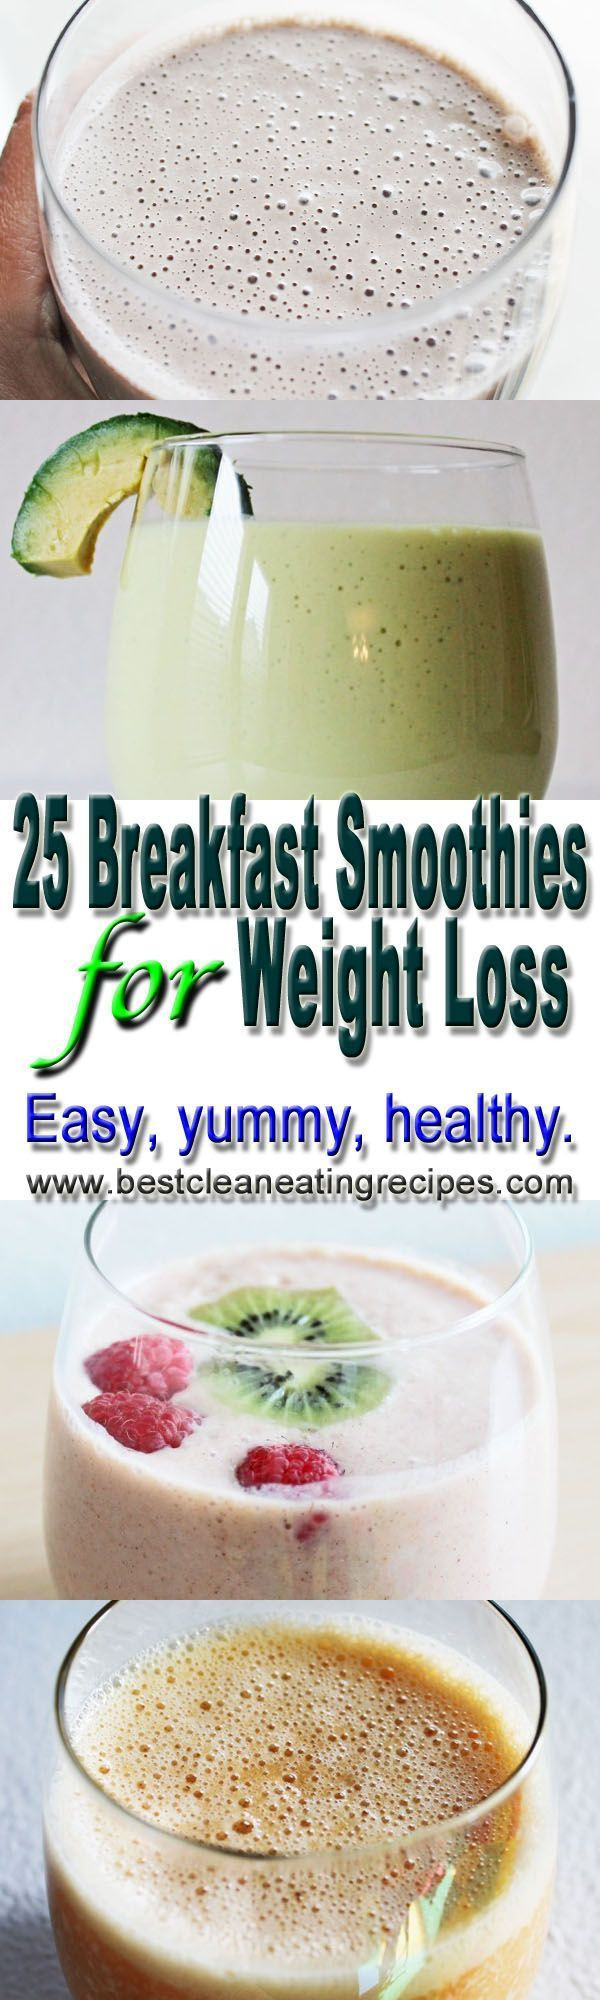 Weight Loss Smoothie Recipes With Whey Protein
 Best 25 Whey protein shakes ideas on Pinterest